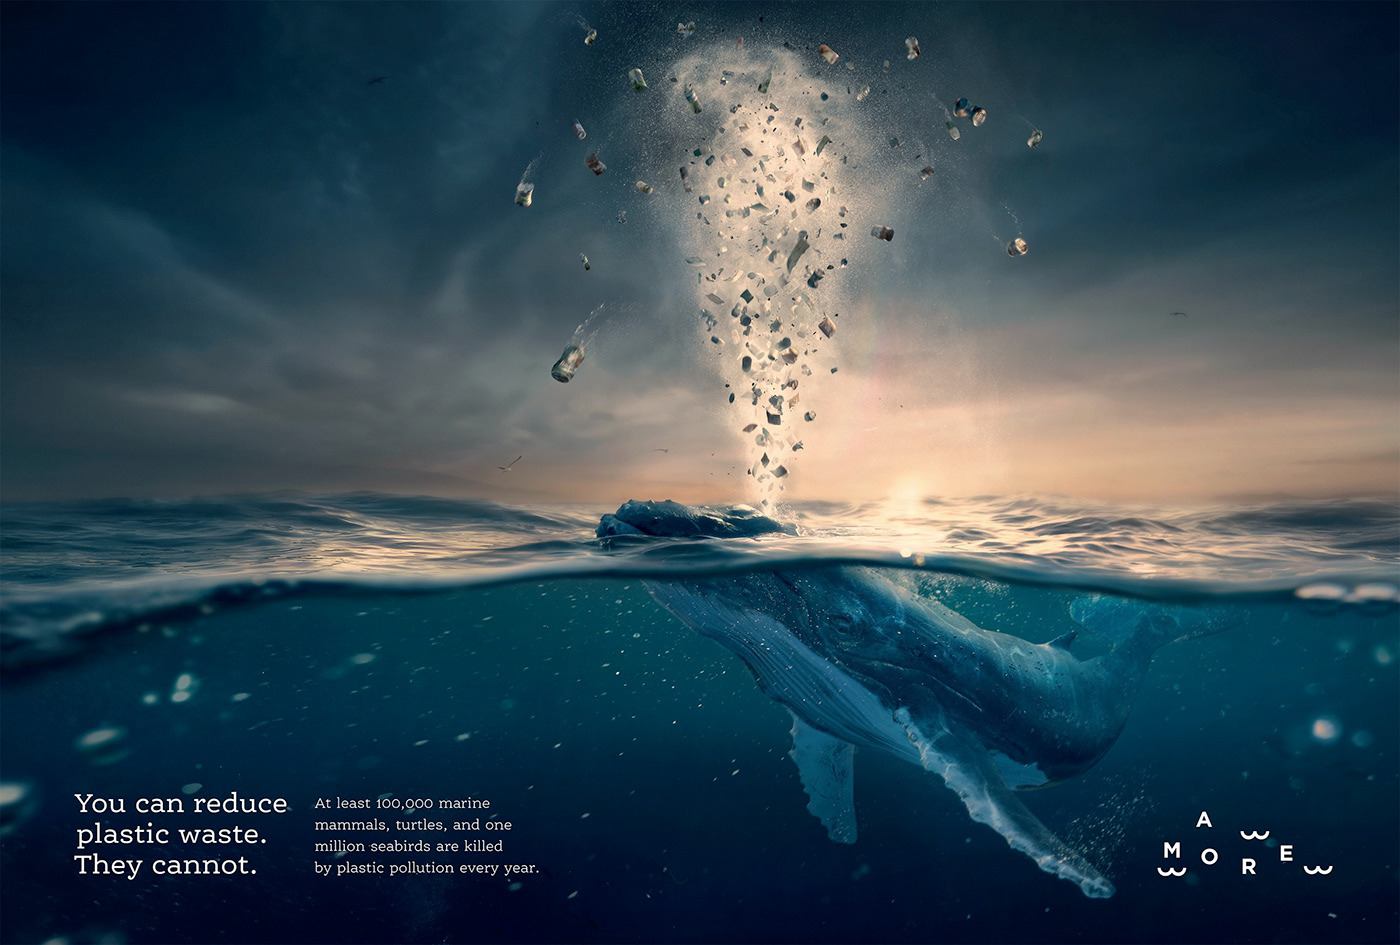 animal earth ecological Nature pollution sea sunset water Whale WWF